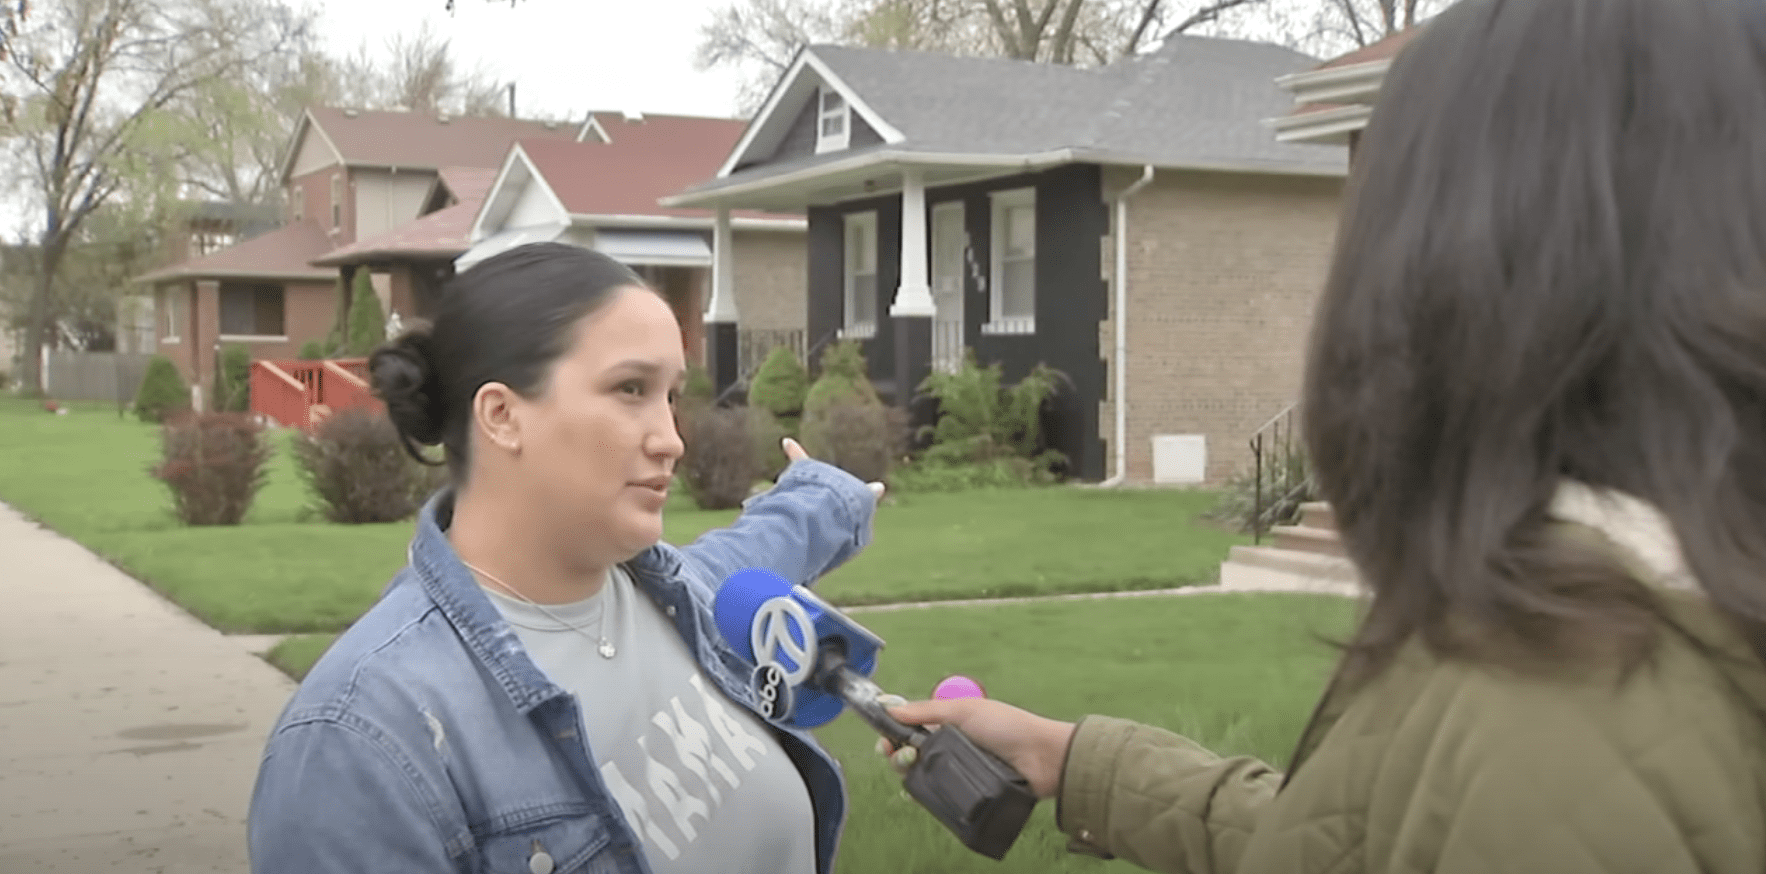 Danielle Cruz points to her house while talking to the ABC 7 correspondent. | Source: YouTube.com/ABC 7 Chicago